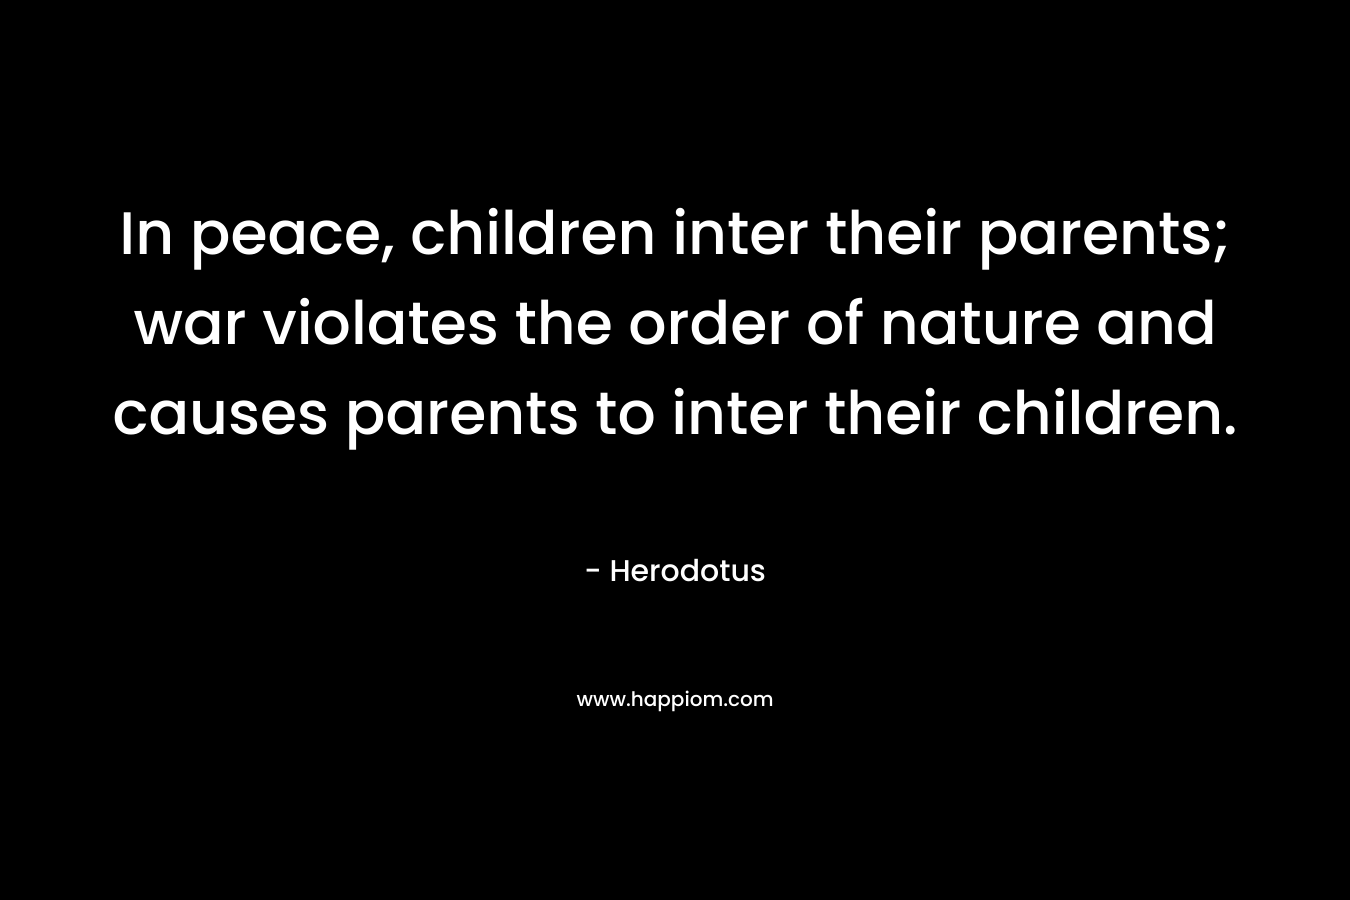 In peace, children inter their parents; war violates the order of nature and causes parents to inter their children. – Herodotus